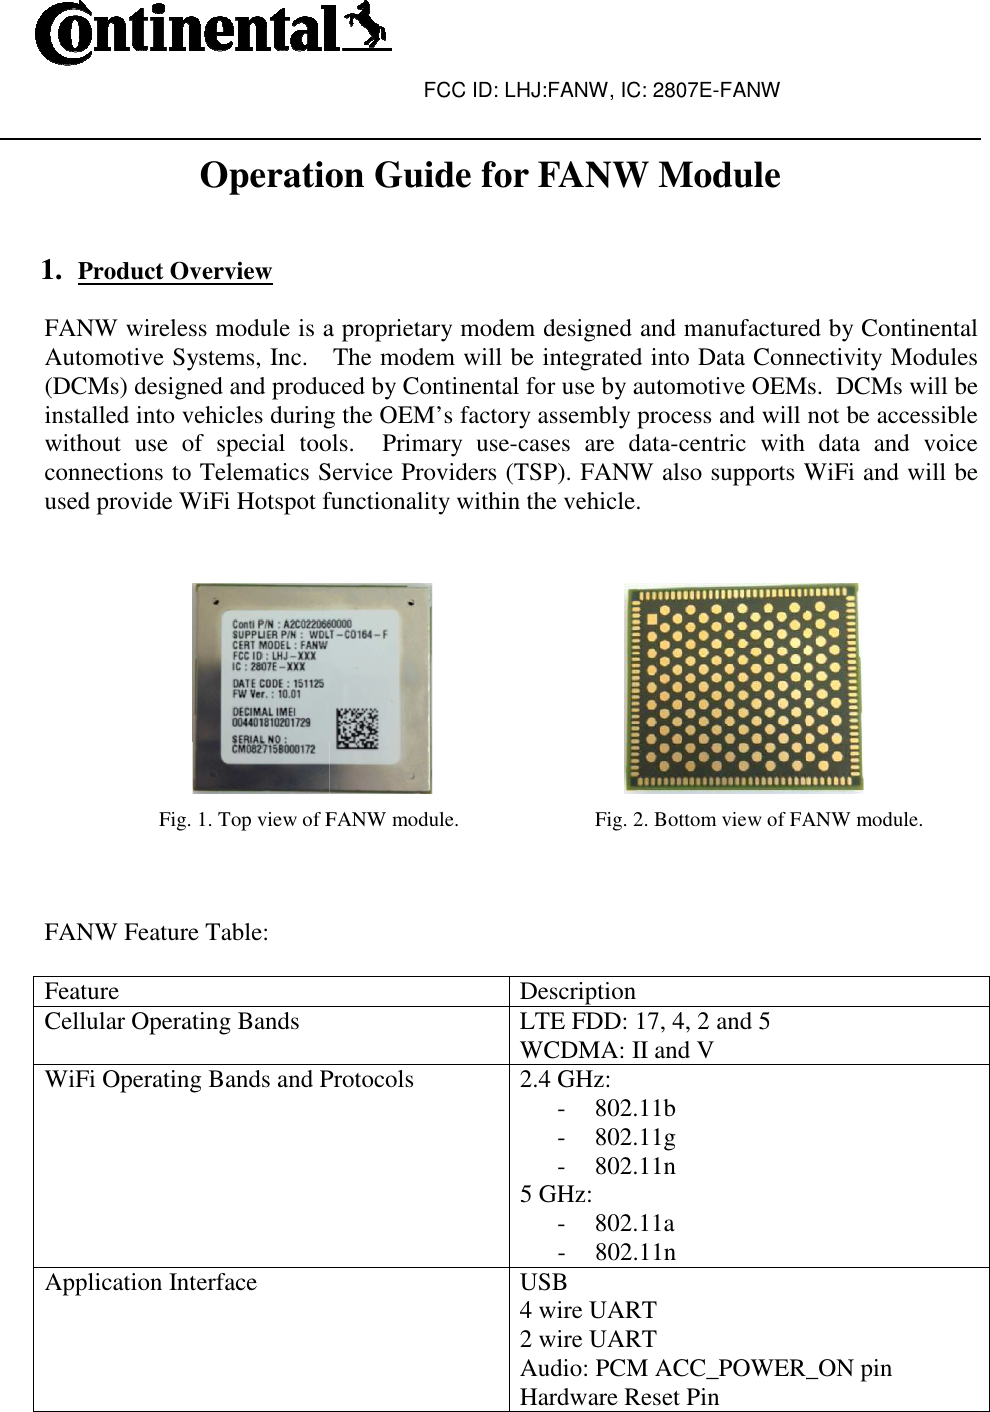  Operation Guide for FANW Module  1. Product Overview  FANW wireless module is a proprietary modem designed and manufactured by Continental Automotive Systems, Inc.   The modem will be integrated into Data Connectivity Modules (DCMs) designed and produced by Continental for use by automotive OEMs.  DCMs will binstalled into vehicles during the OEM’s factory assembly process and will not be accessible without  use  of  special  tools.    Primary  useconnections to Telematics Service Providers (TSP). FANW also supports WiFi used provide WiFi Hotspot functionality within the vehicle.                                        Fig. 1. Top view of FANW module.                          Fig. 2. Bottom view of FANW module.   FANW Feature Table:  Feature Cellular Operating Bands WiFi Operating Bands and ProtocolsApplication Interface FCC ID: LHJ:FANW, IC: 2807E-FANW  Operation Guide for FANW Module FANW wireless module is a proprietary modem designed and manufactured by Continental Automotive Systems, Inc.   The modem will be integrated into Data Connectivity Modules (DCMs) designed and produced by Continental for use by automotive OEMs.  DCMs will binstalled into vehicles during the OEM’s factory assembly process and will not be accessible without  use  of  special  tools.    Primary  use-cases  are  data-centric  with  data  and  voice connections to Telematics Service Providers (TSP). FANW also supports WiFi used provide WiFi Hotspot functionality within the vehicle.                               Fig. 1. Top view of FANW module.                          Fig. 2. Bottom view of FANW module.Description LTE FDD: 17, 4, 2 and 5 WCDMA: II and V WiFi Operating Bands and Protocols  2.4 GHz:  - 802.11b - 802.11g - 802.11n 5 GHz: - 802.11a - 802.11n USB 4 wire UART 2 wire UART Audio: PCM ACC_POWER_ON pinHardware Reset Pin FANW wireless module is a proprietary modem designed and manufactured by Continental Automotive Systems, Inc.   The modem will be integrated into Data Connectivity Modules (DCMs) designed and produced by Continental for use by automotive OEMs.  DCMs will be installed into vehicles during the OEM’s factory assembly process and will not be accessible centric  with  data  and  voice connections to Telematics Service Providers (TSP). FANW also supports WiFi and will be  Fig. 1. Top view of FANW module.                          Fig. 2. Bottom view of FANW module. ACC_POWER_ON pin 